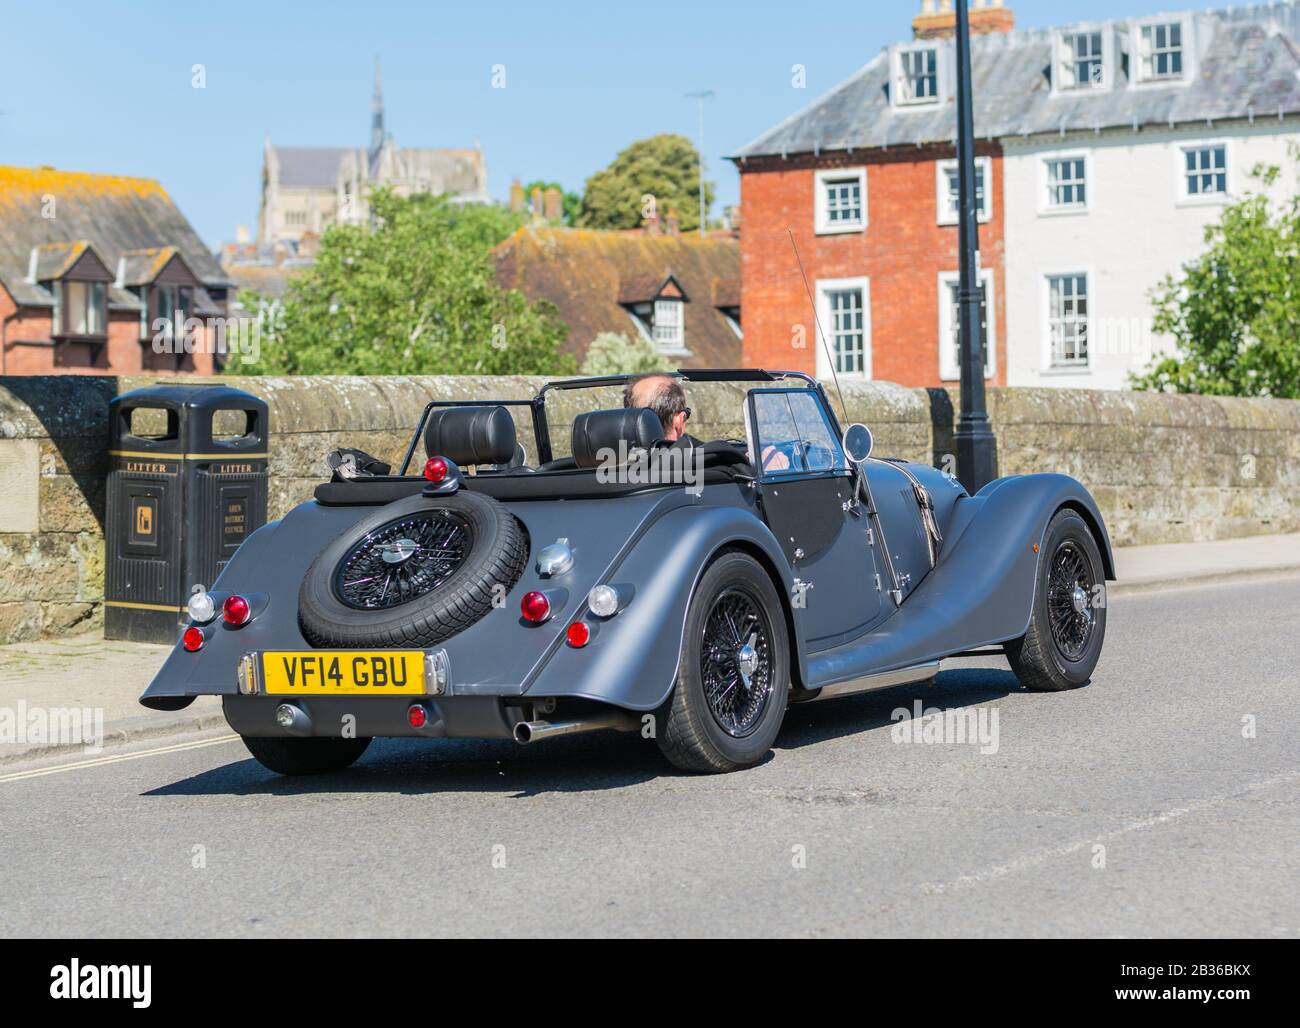 Man driving a 2014 Morgan 4/4 (Morgan Four Four) car, a small convertible sports car with the top down in Summer in England, UK. Stock Photo